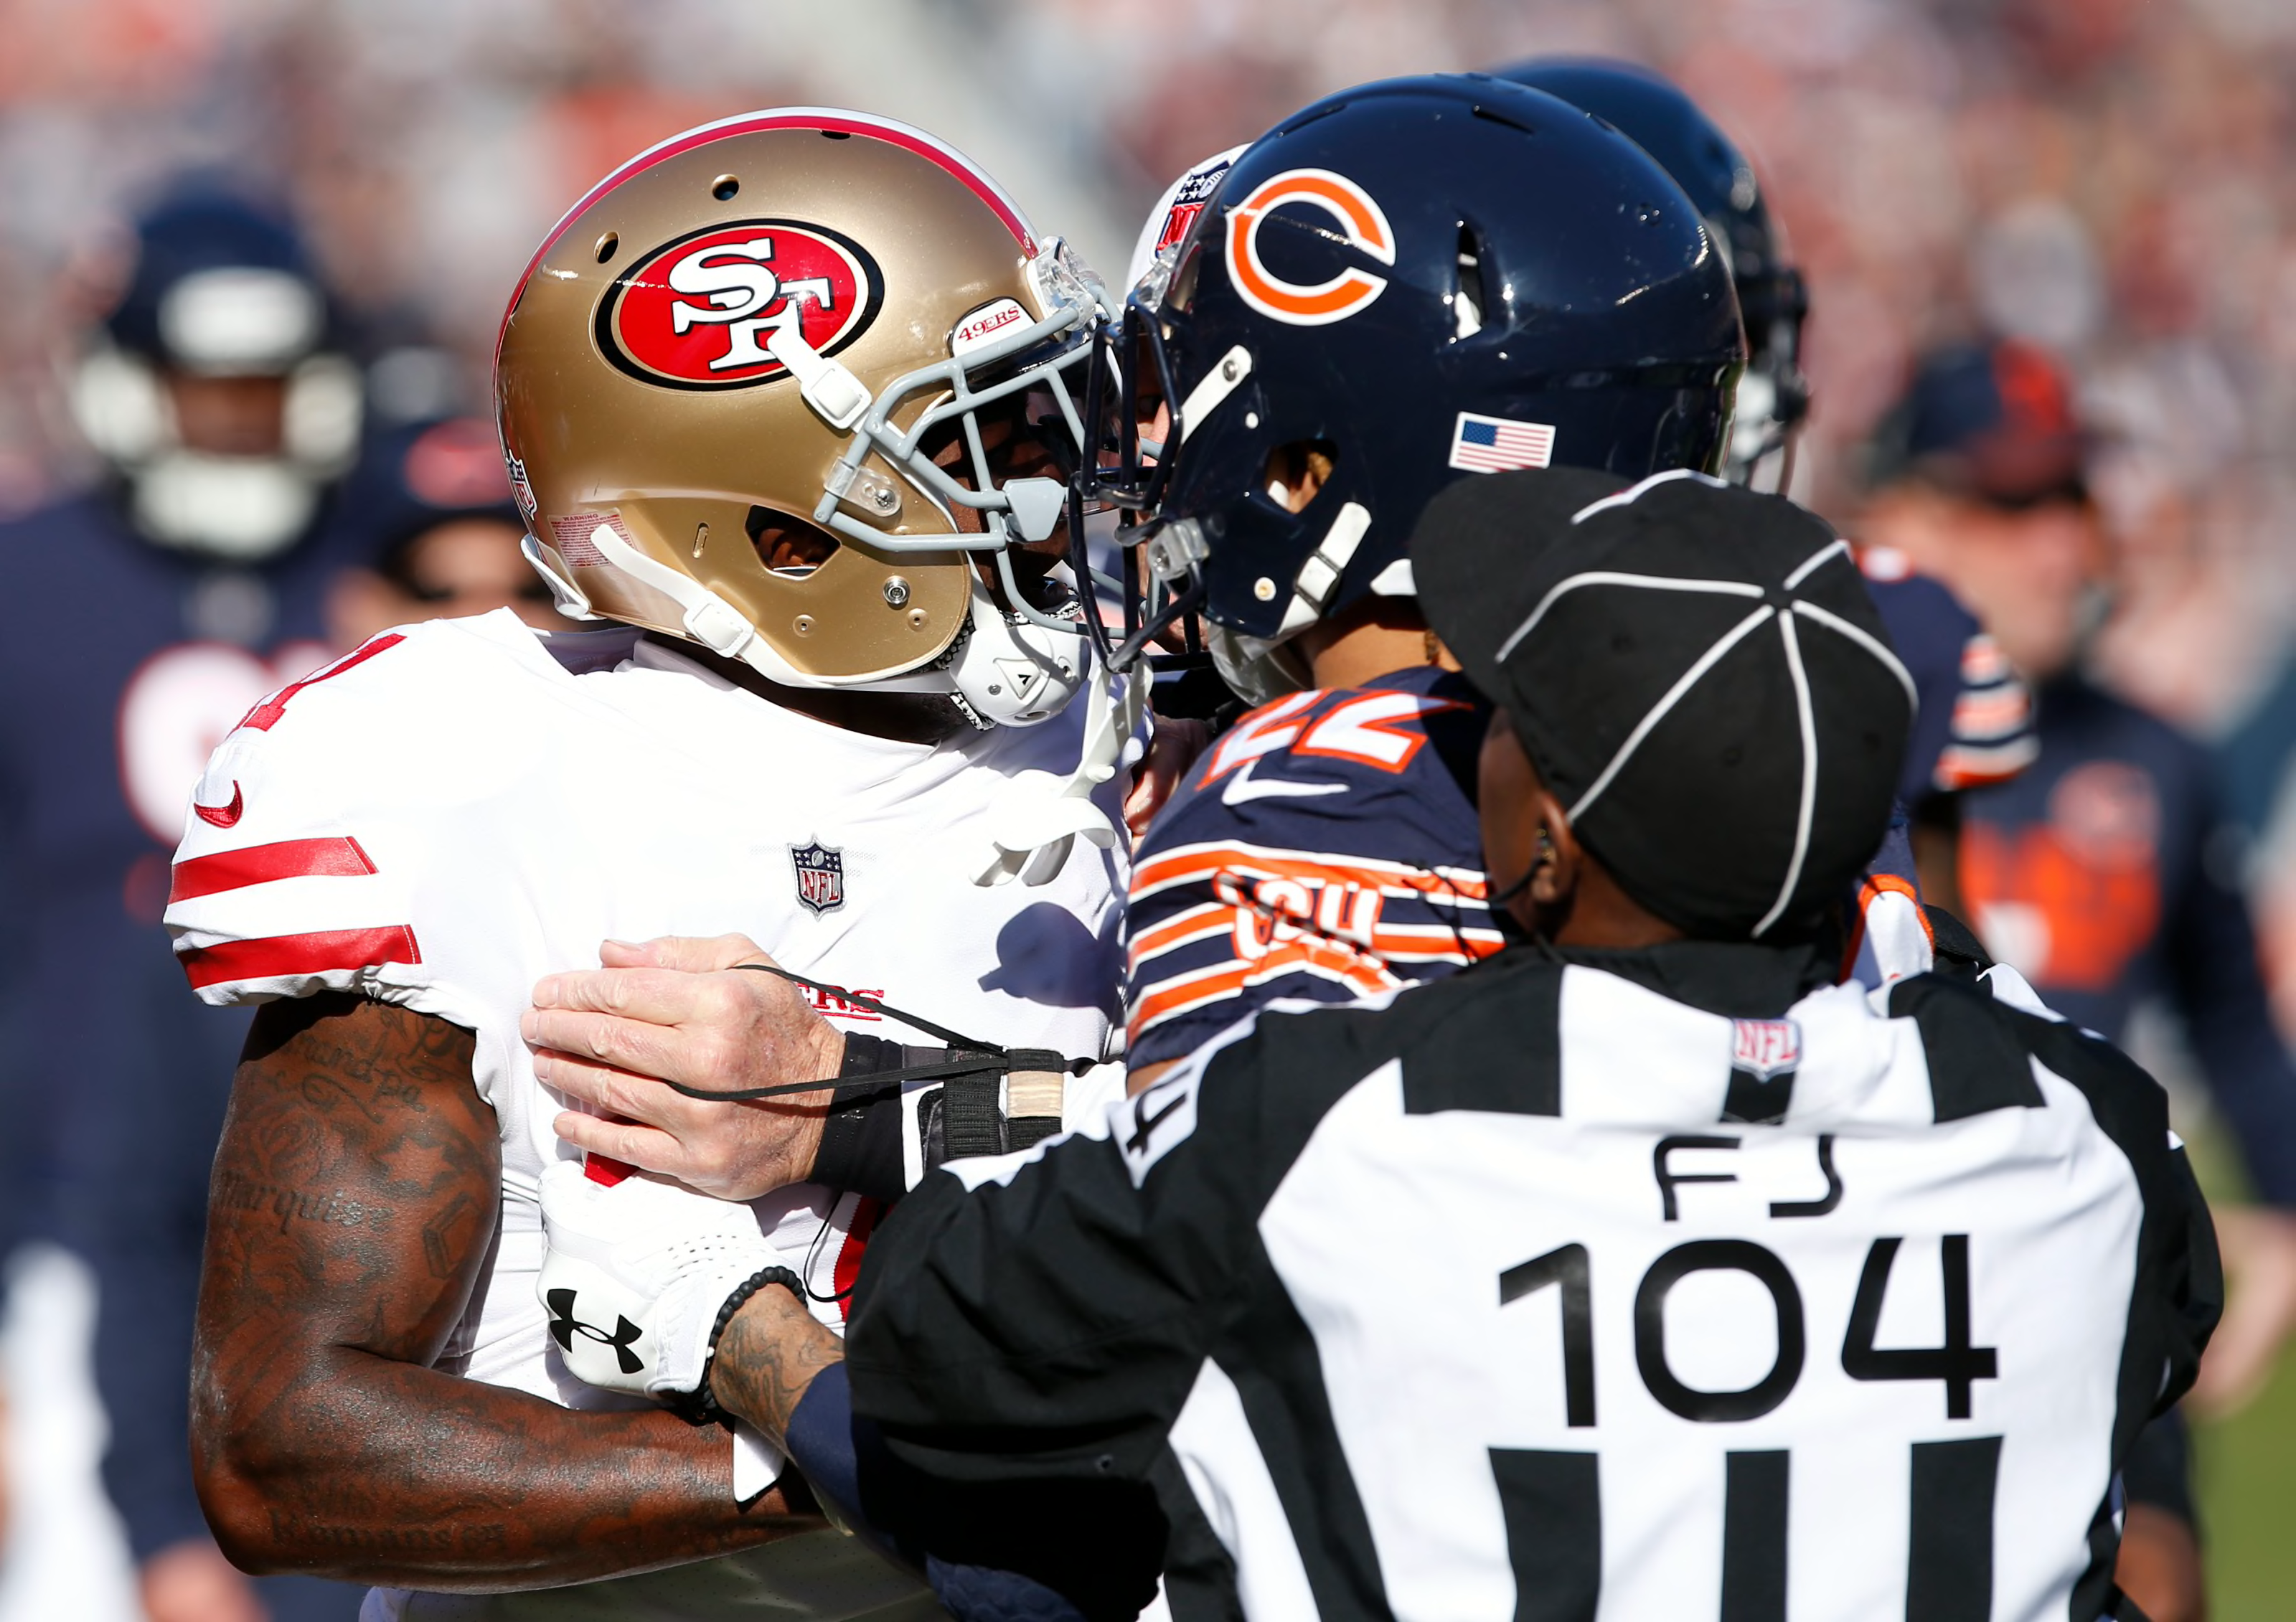 49ers vs. Bears Behind enemy lines with FanSided's Bear Goggles On